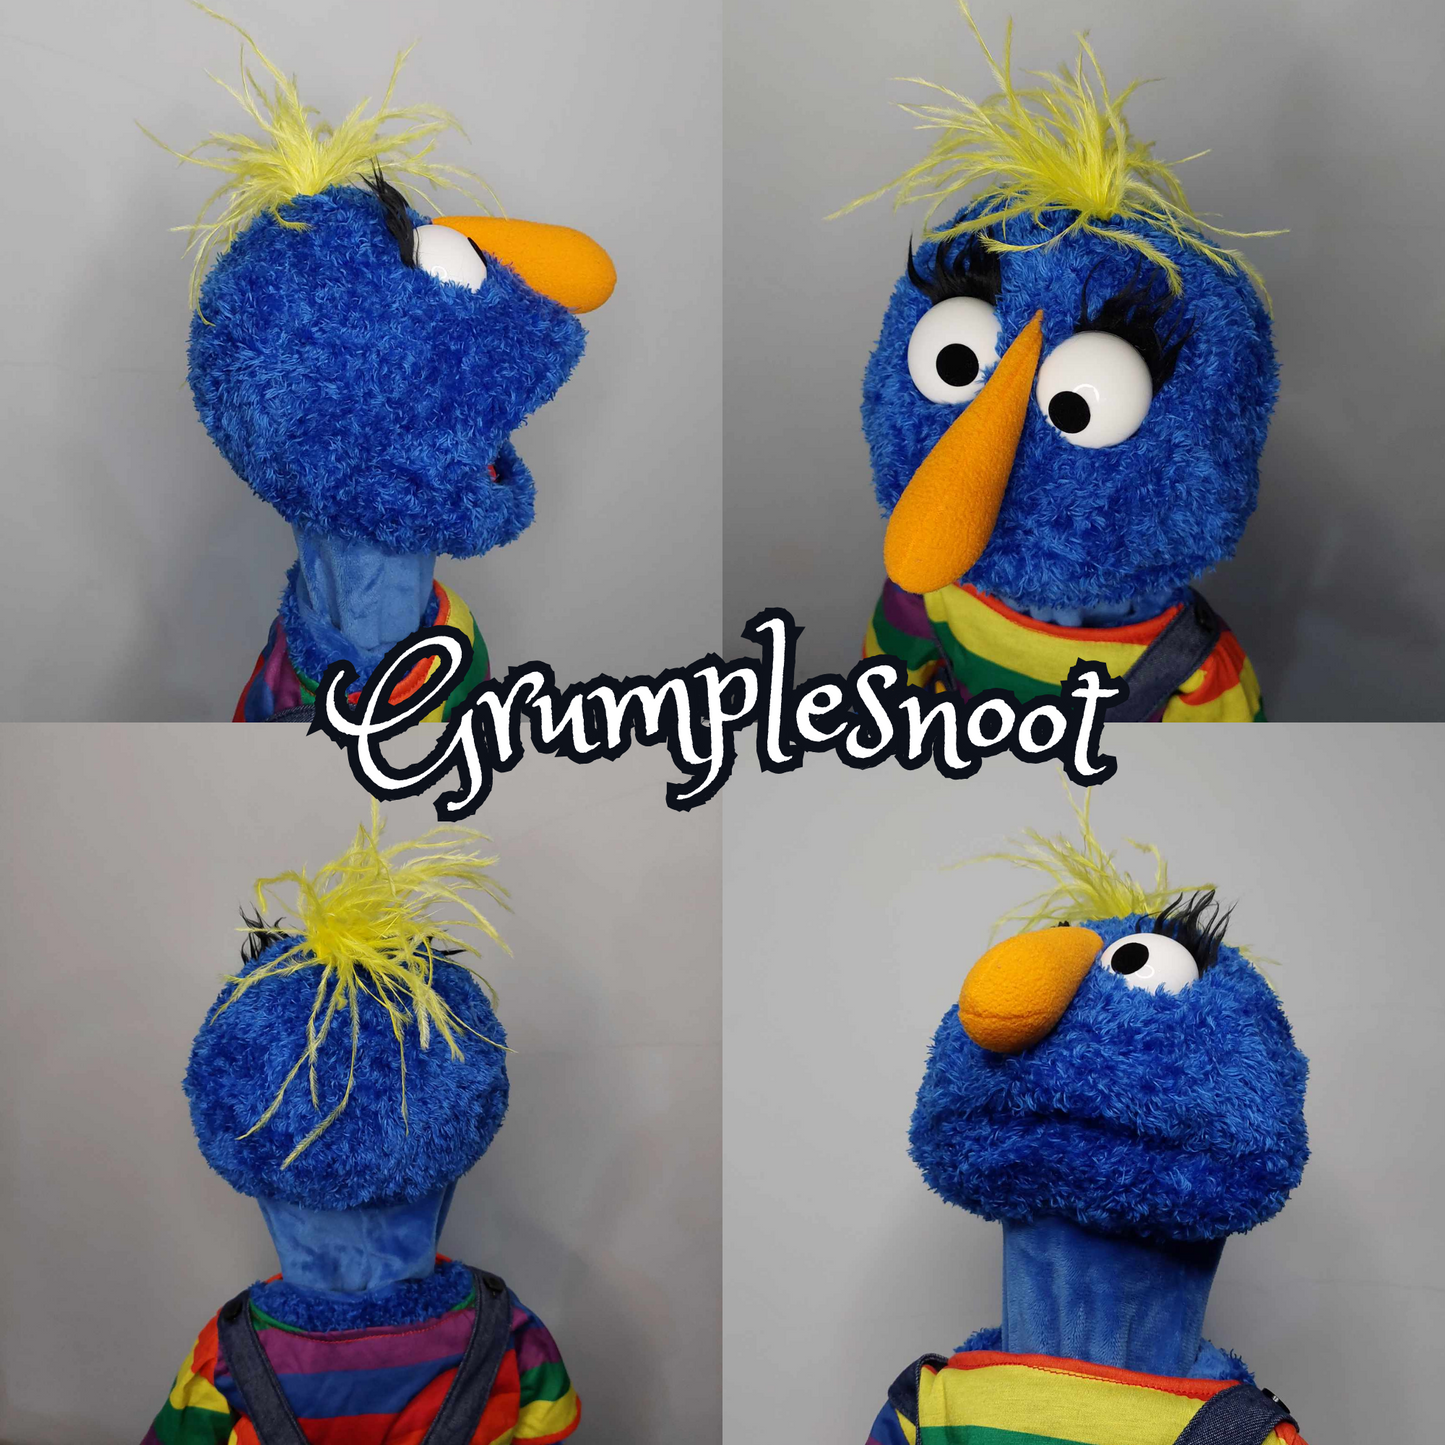 Pubbet 11: 'Grumplesnoot' 23" Full Body Furry Monster Hand Puppet Set CLEARANCE SALE